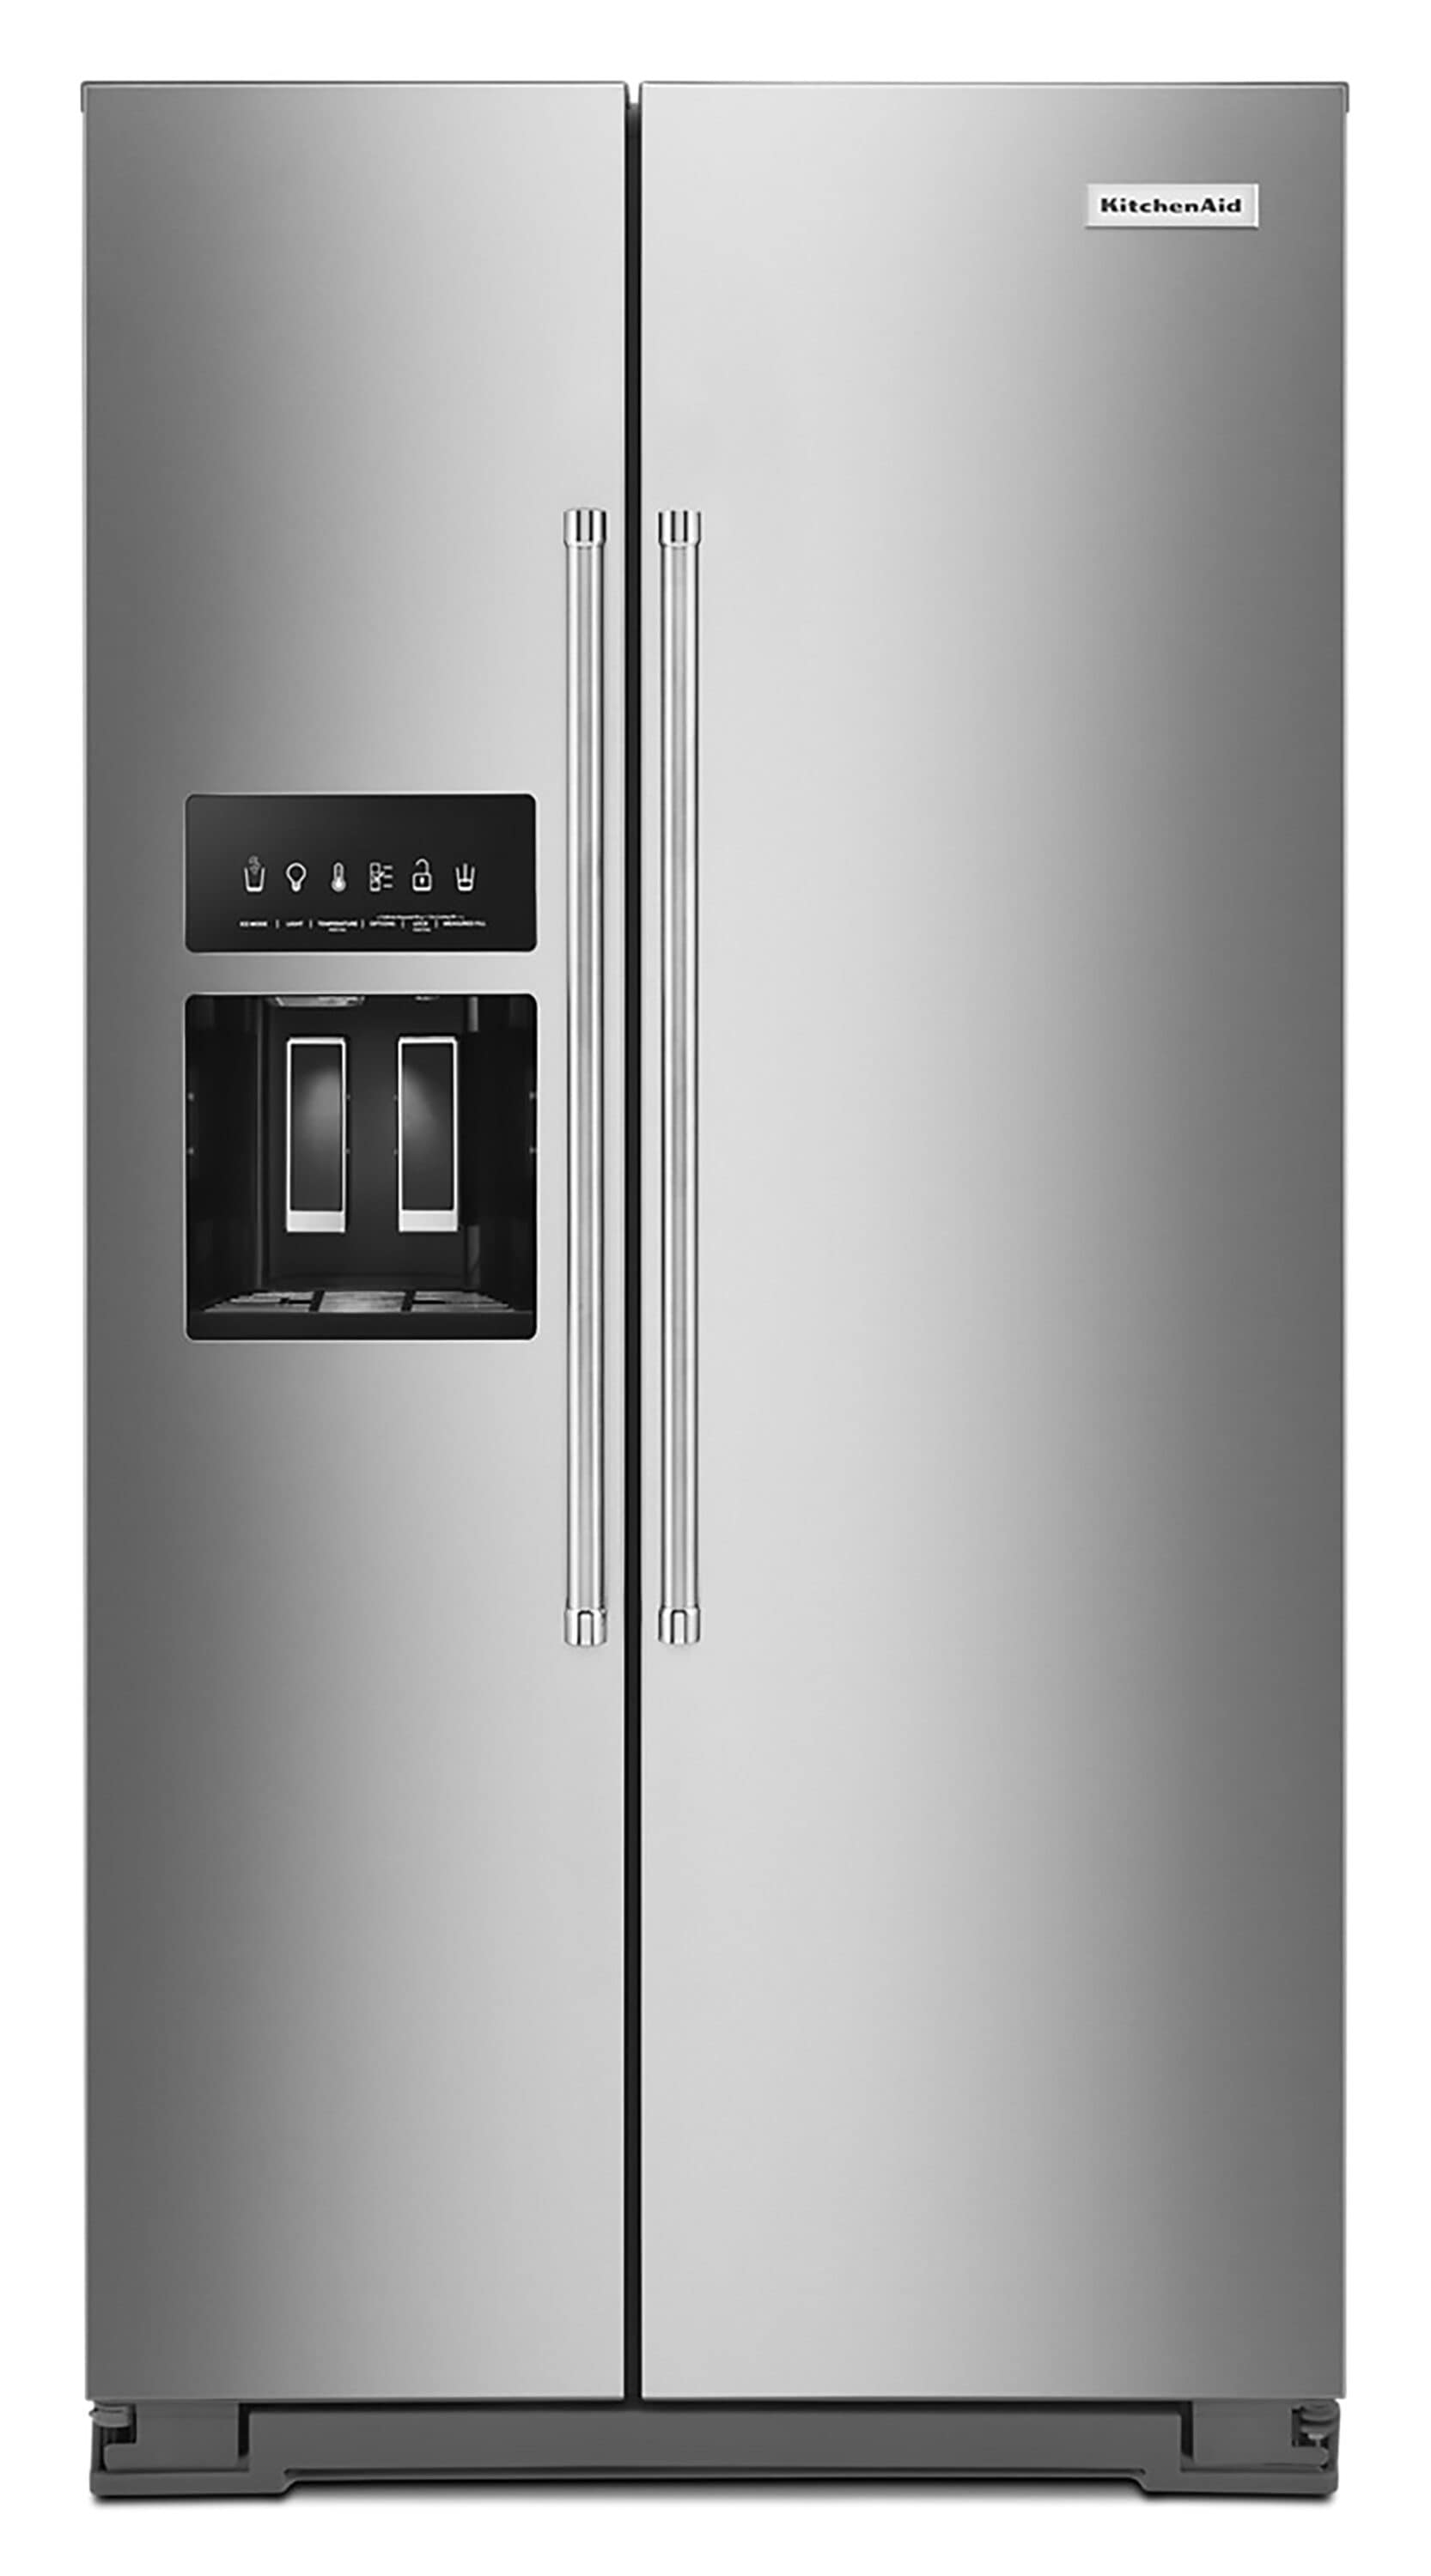 KitchenAid 19.8-cu ft Counter-depth Side-by-Side Refrigerator with 